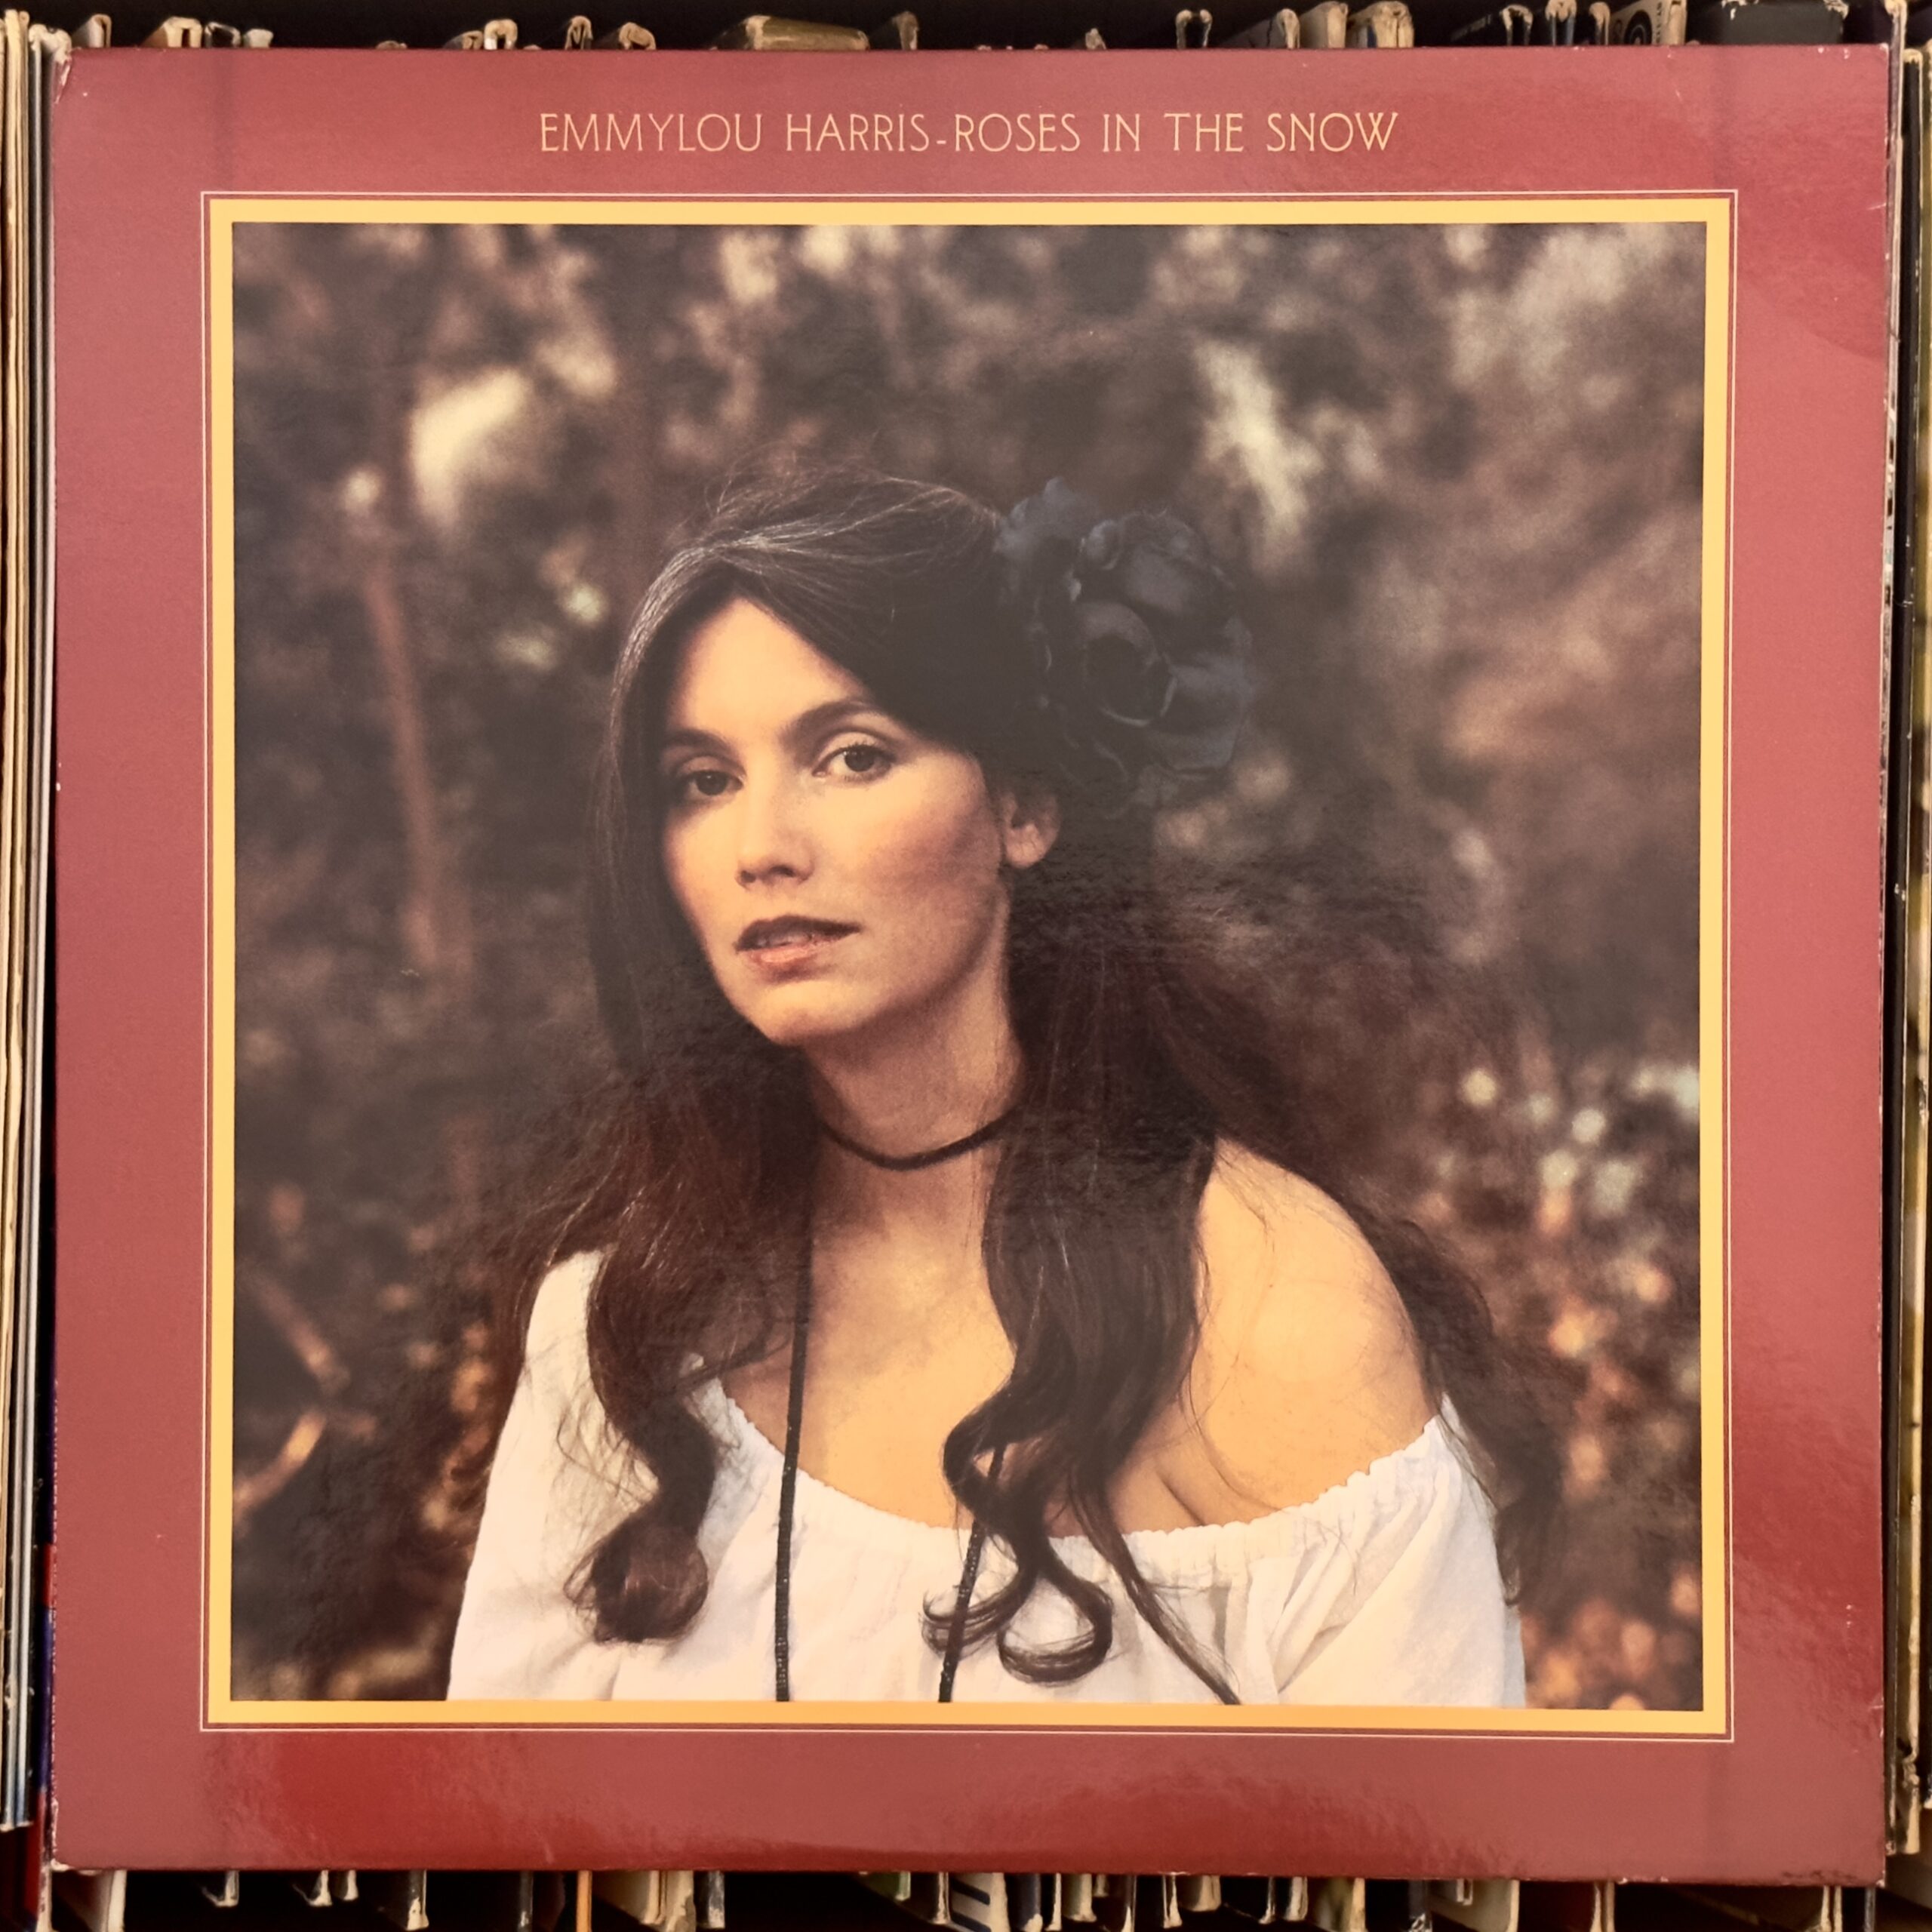 Roses in the Snow by Emmylou Harris